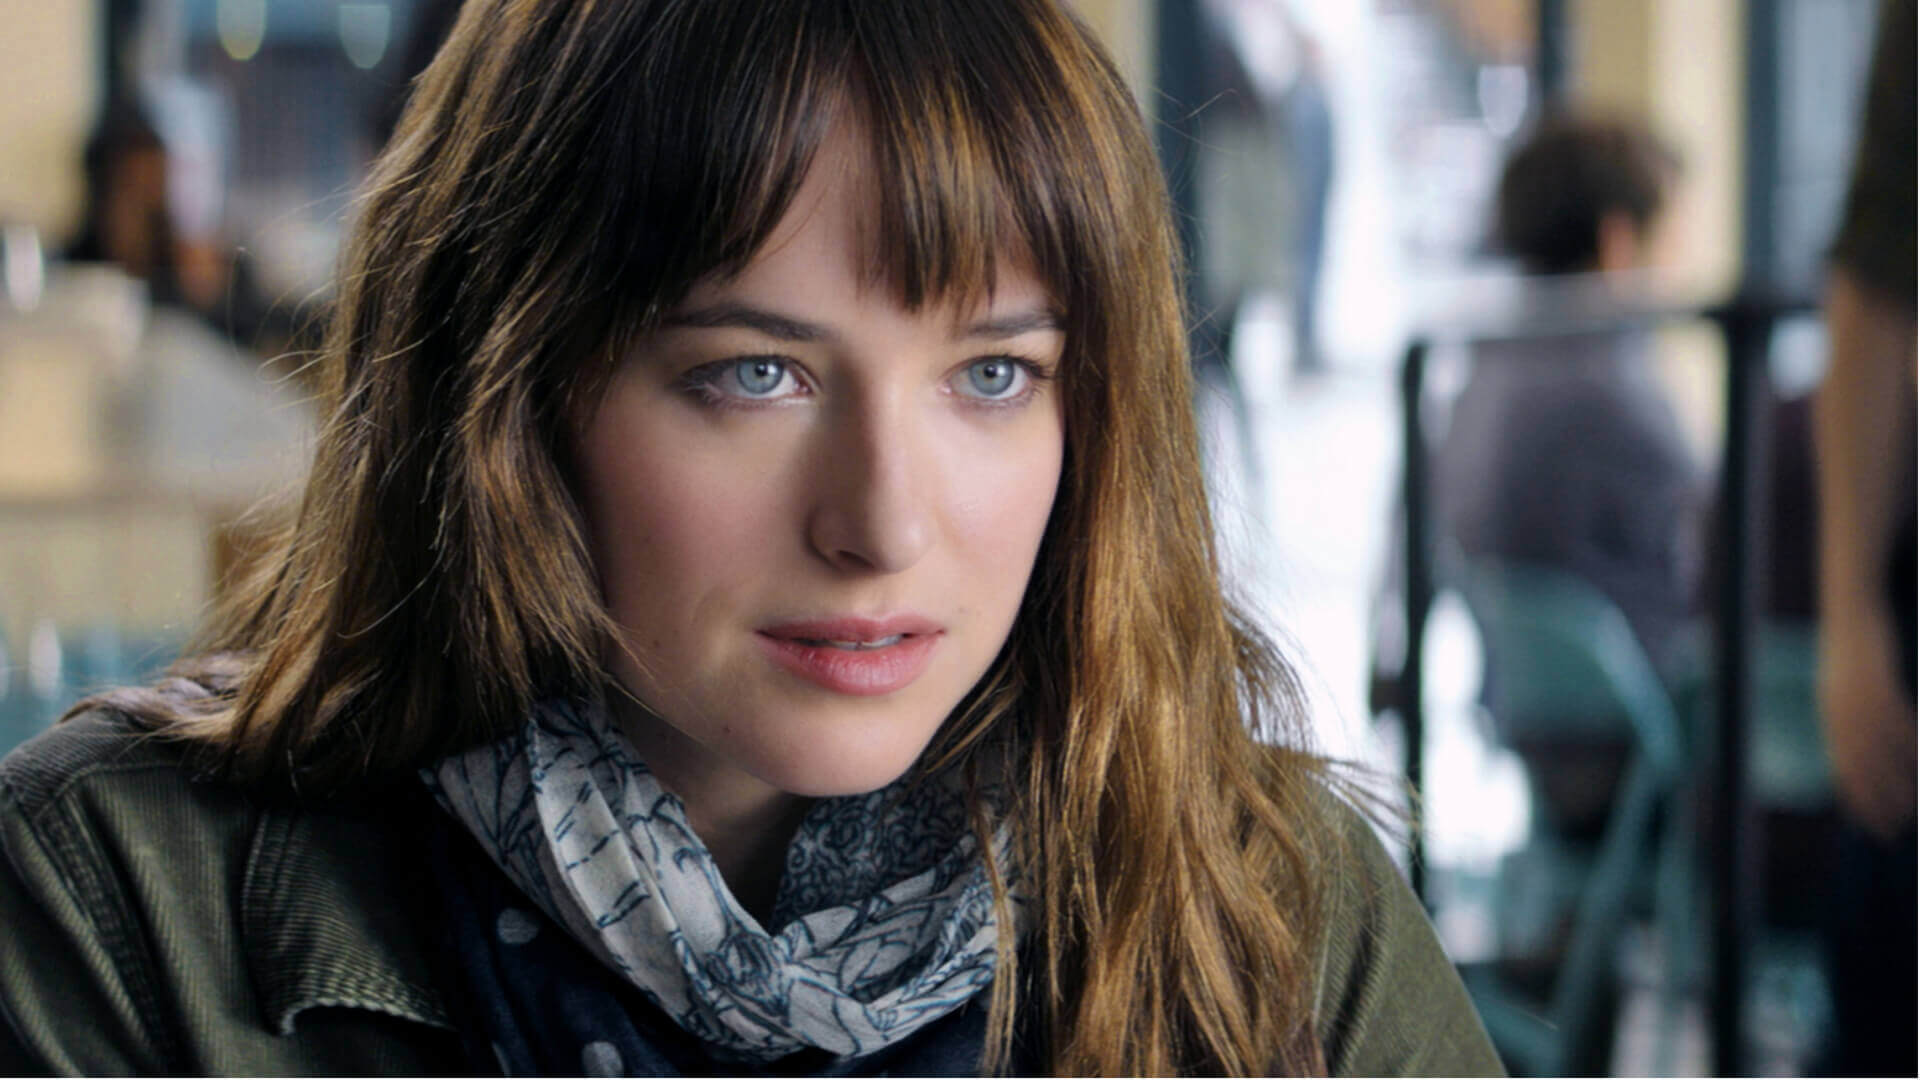 Dakota Johnson looking attentively in a still from Fifty Shades of Grey